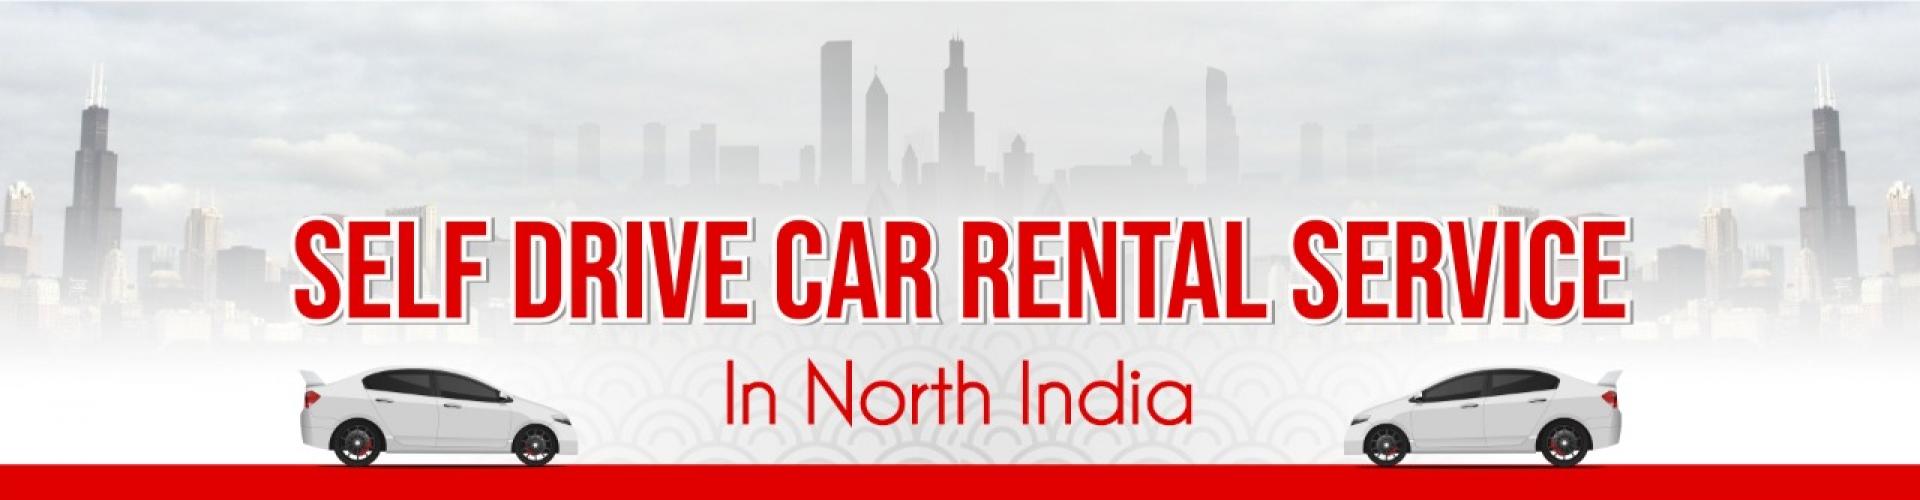 car on rent in mohali